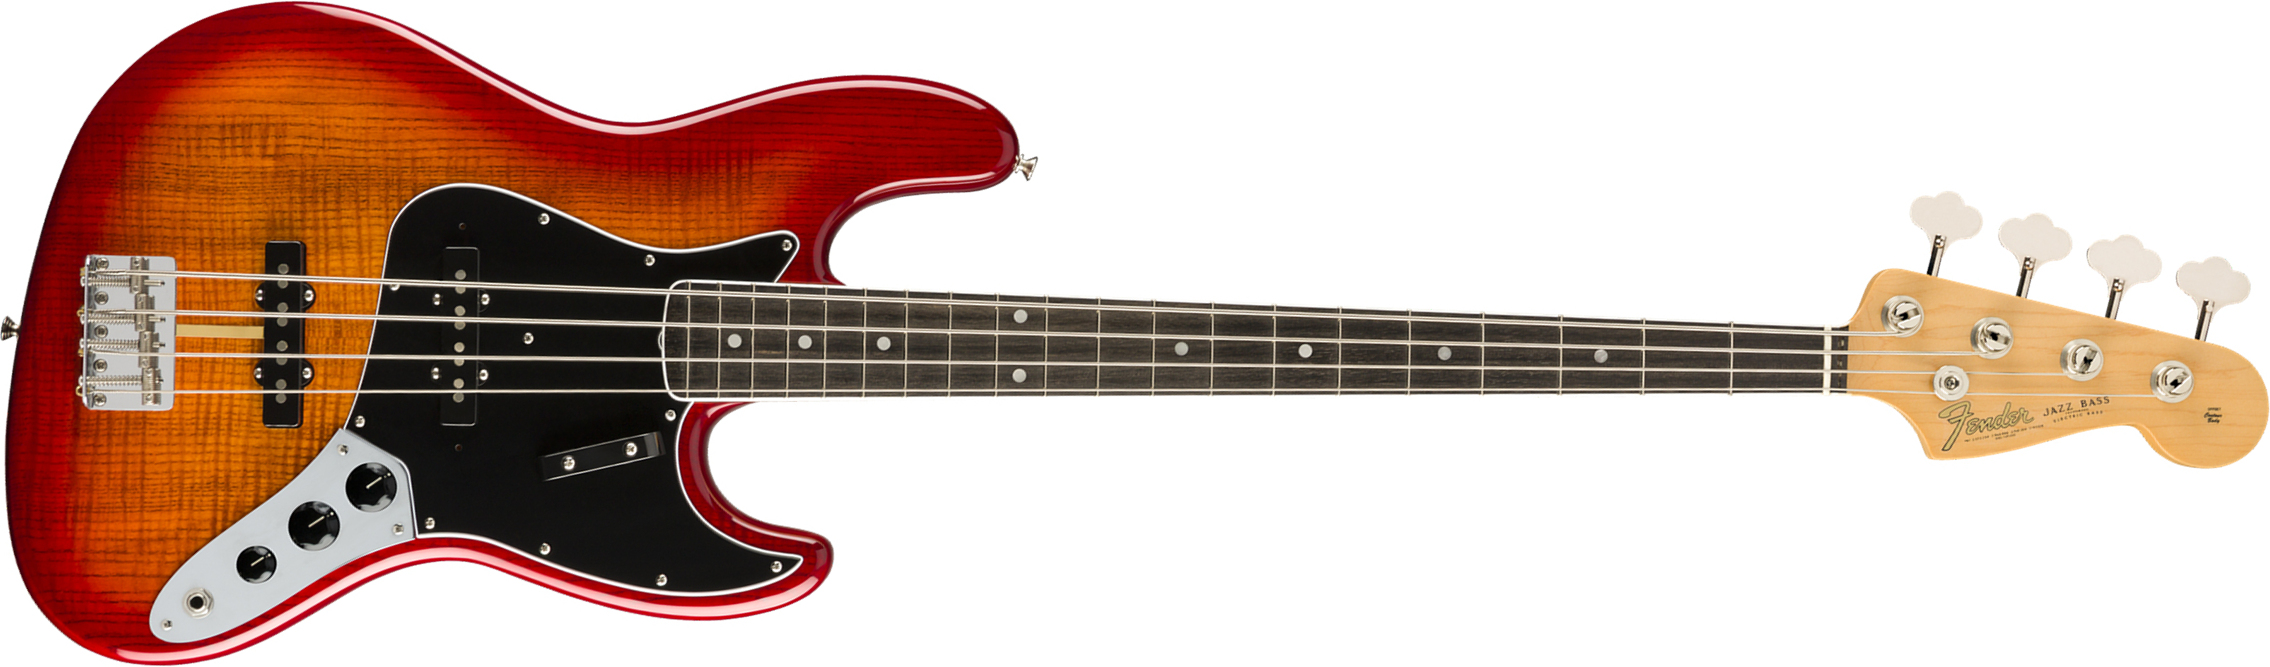 Fender Jazz Bass Flame Ash Top Rarities Usa Eb - Plasma Red Burst - Solid body electric bass - Main picture